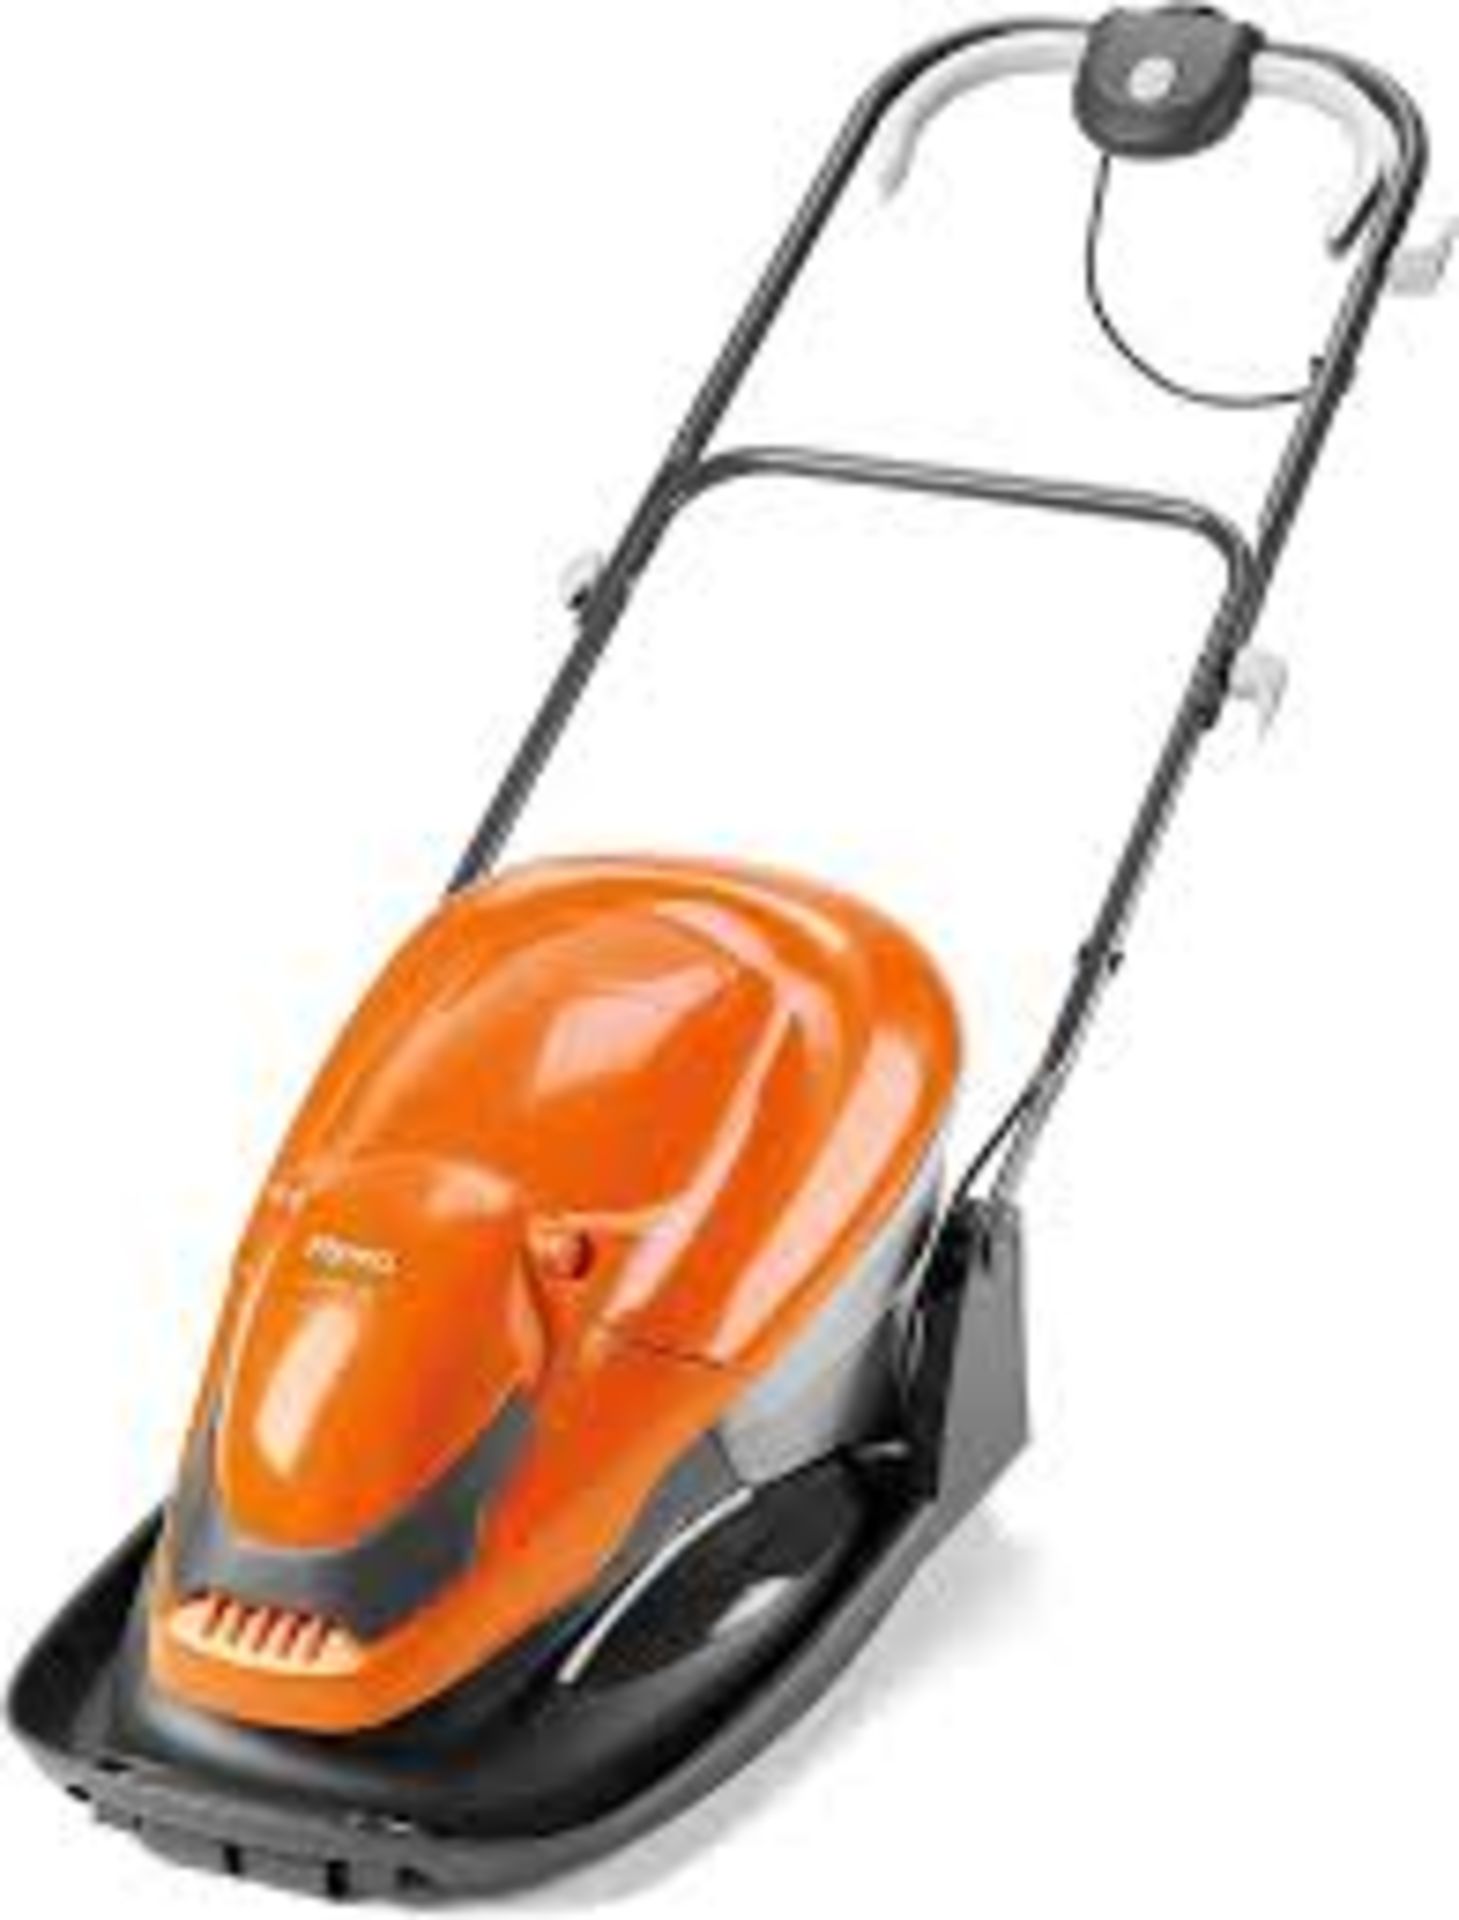 Flymo Easi Glide 300V Corded Hover Lawnmower. - PW. This Flymo Easi Glide 300V Lawnmower is ideal